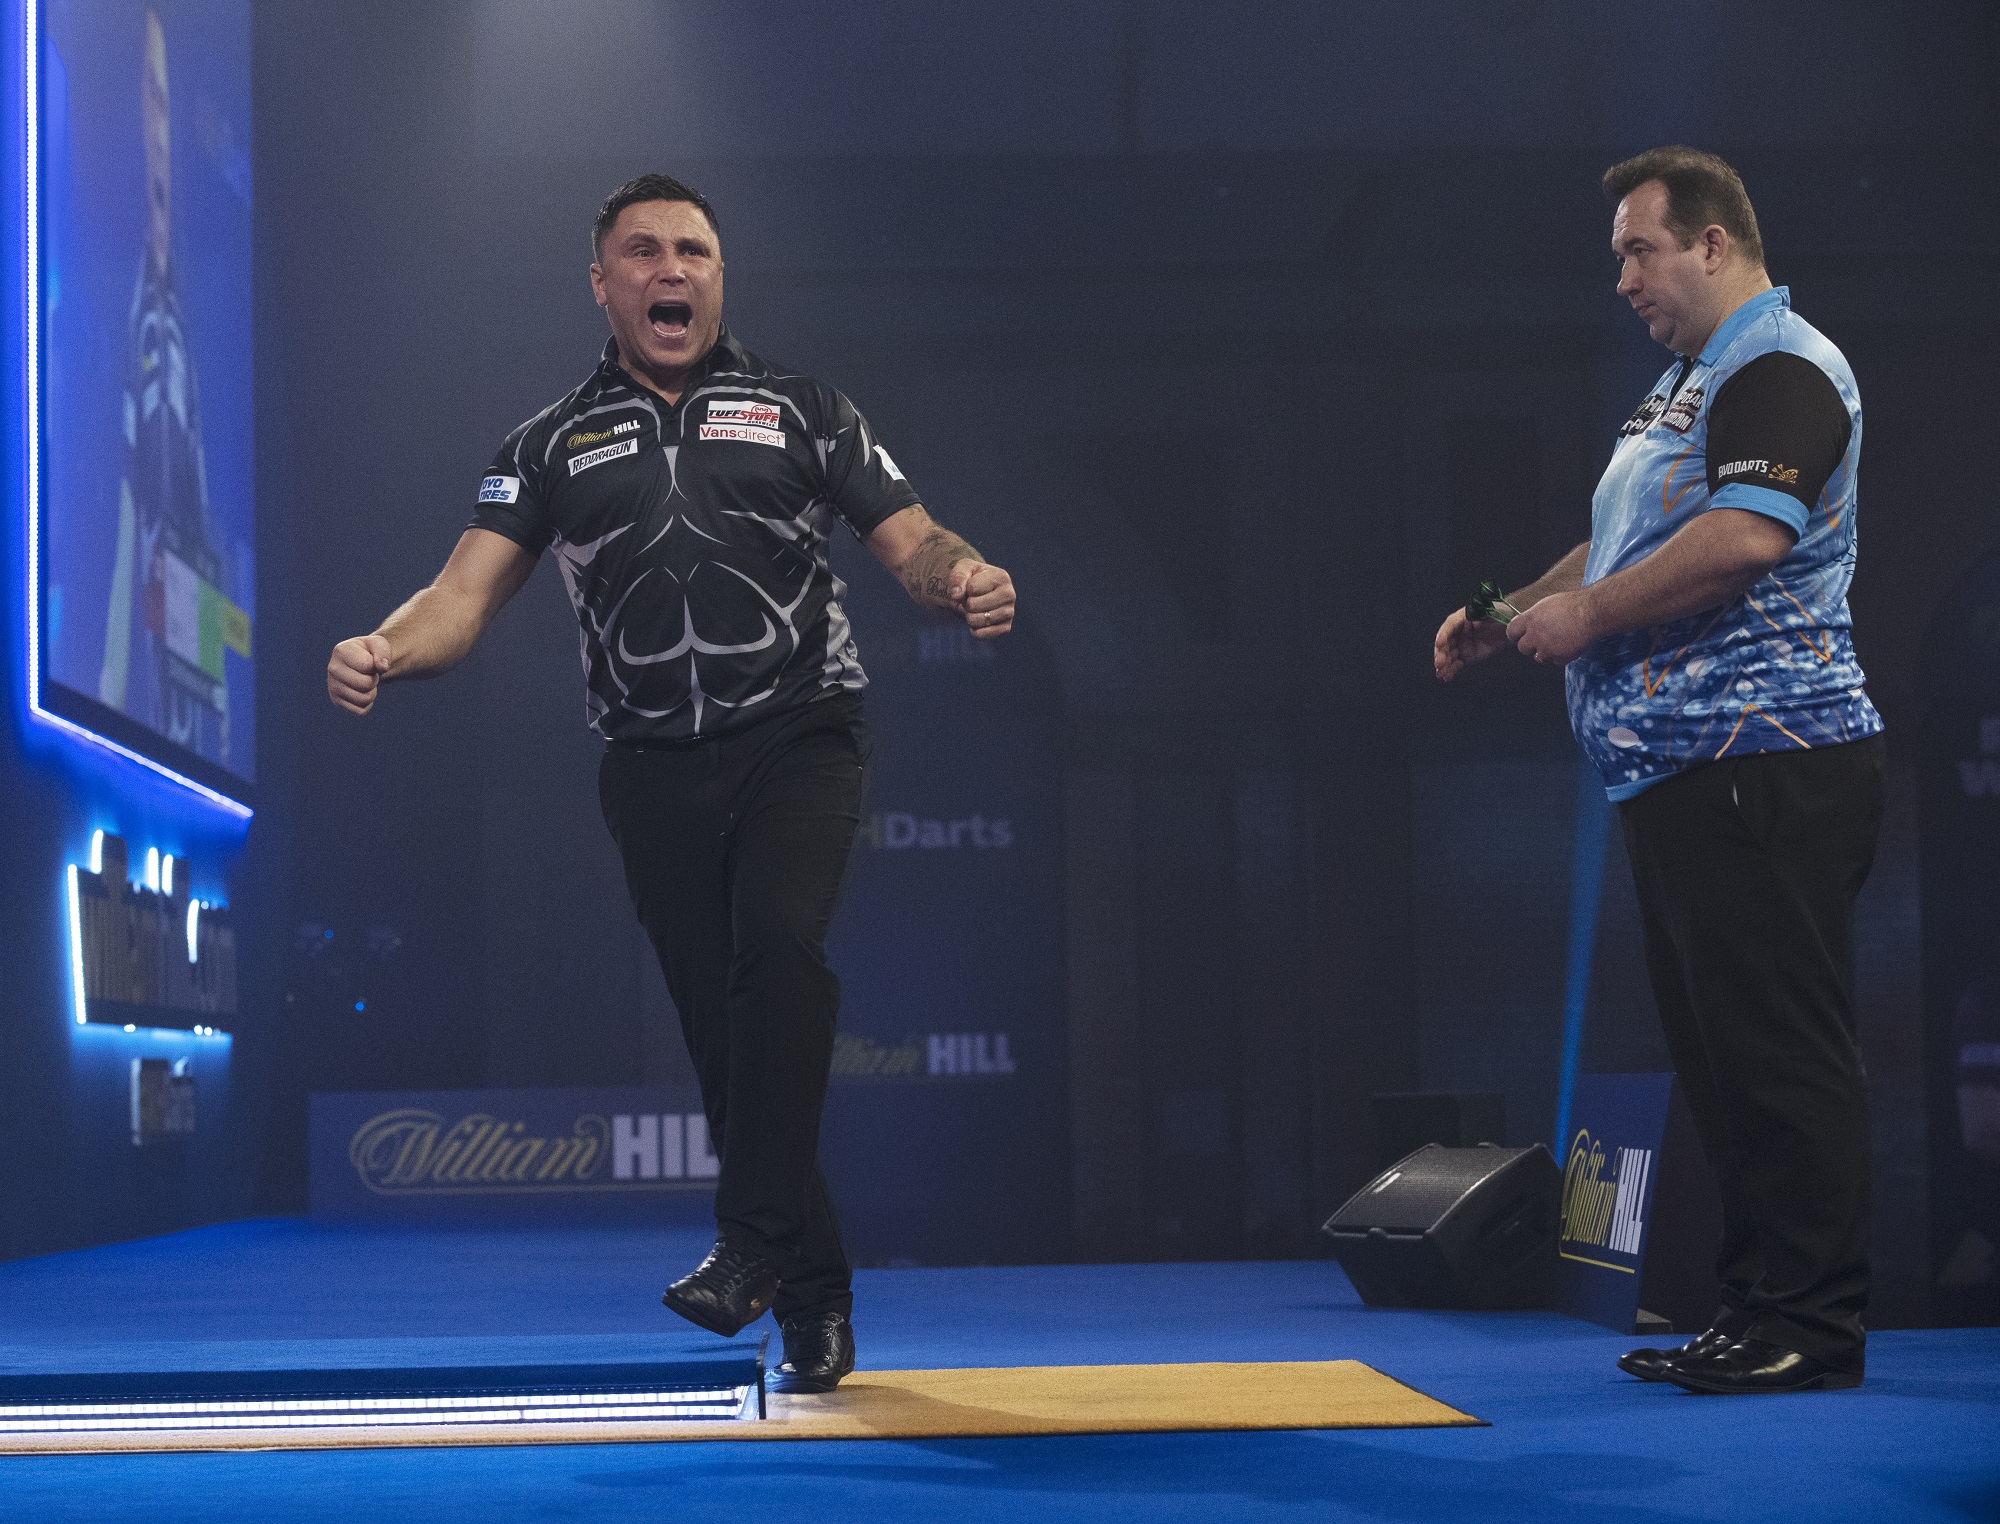 Price wins an epic on Day 11 of World Darts Championship